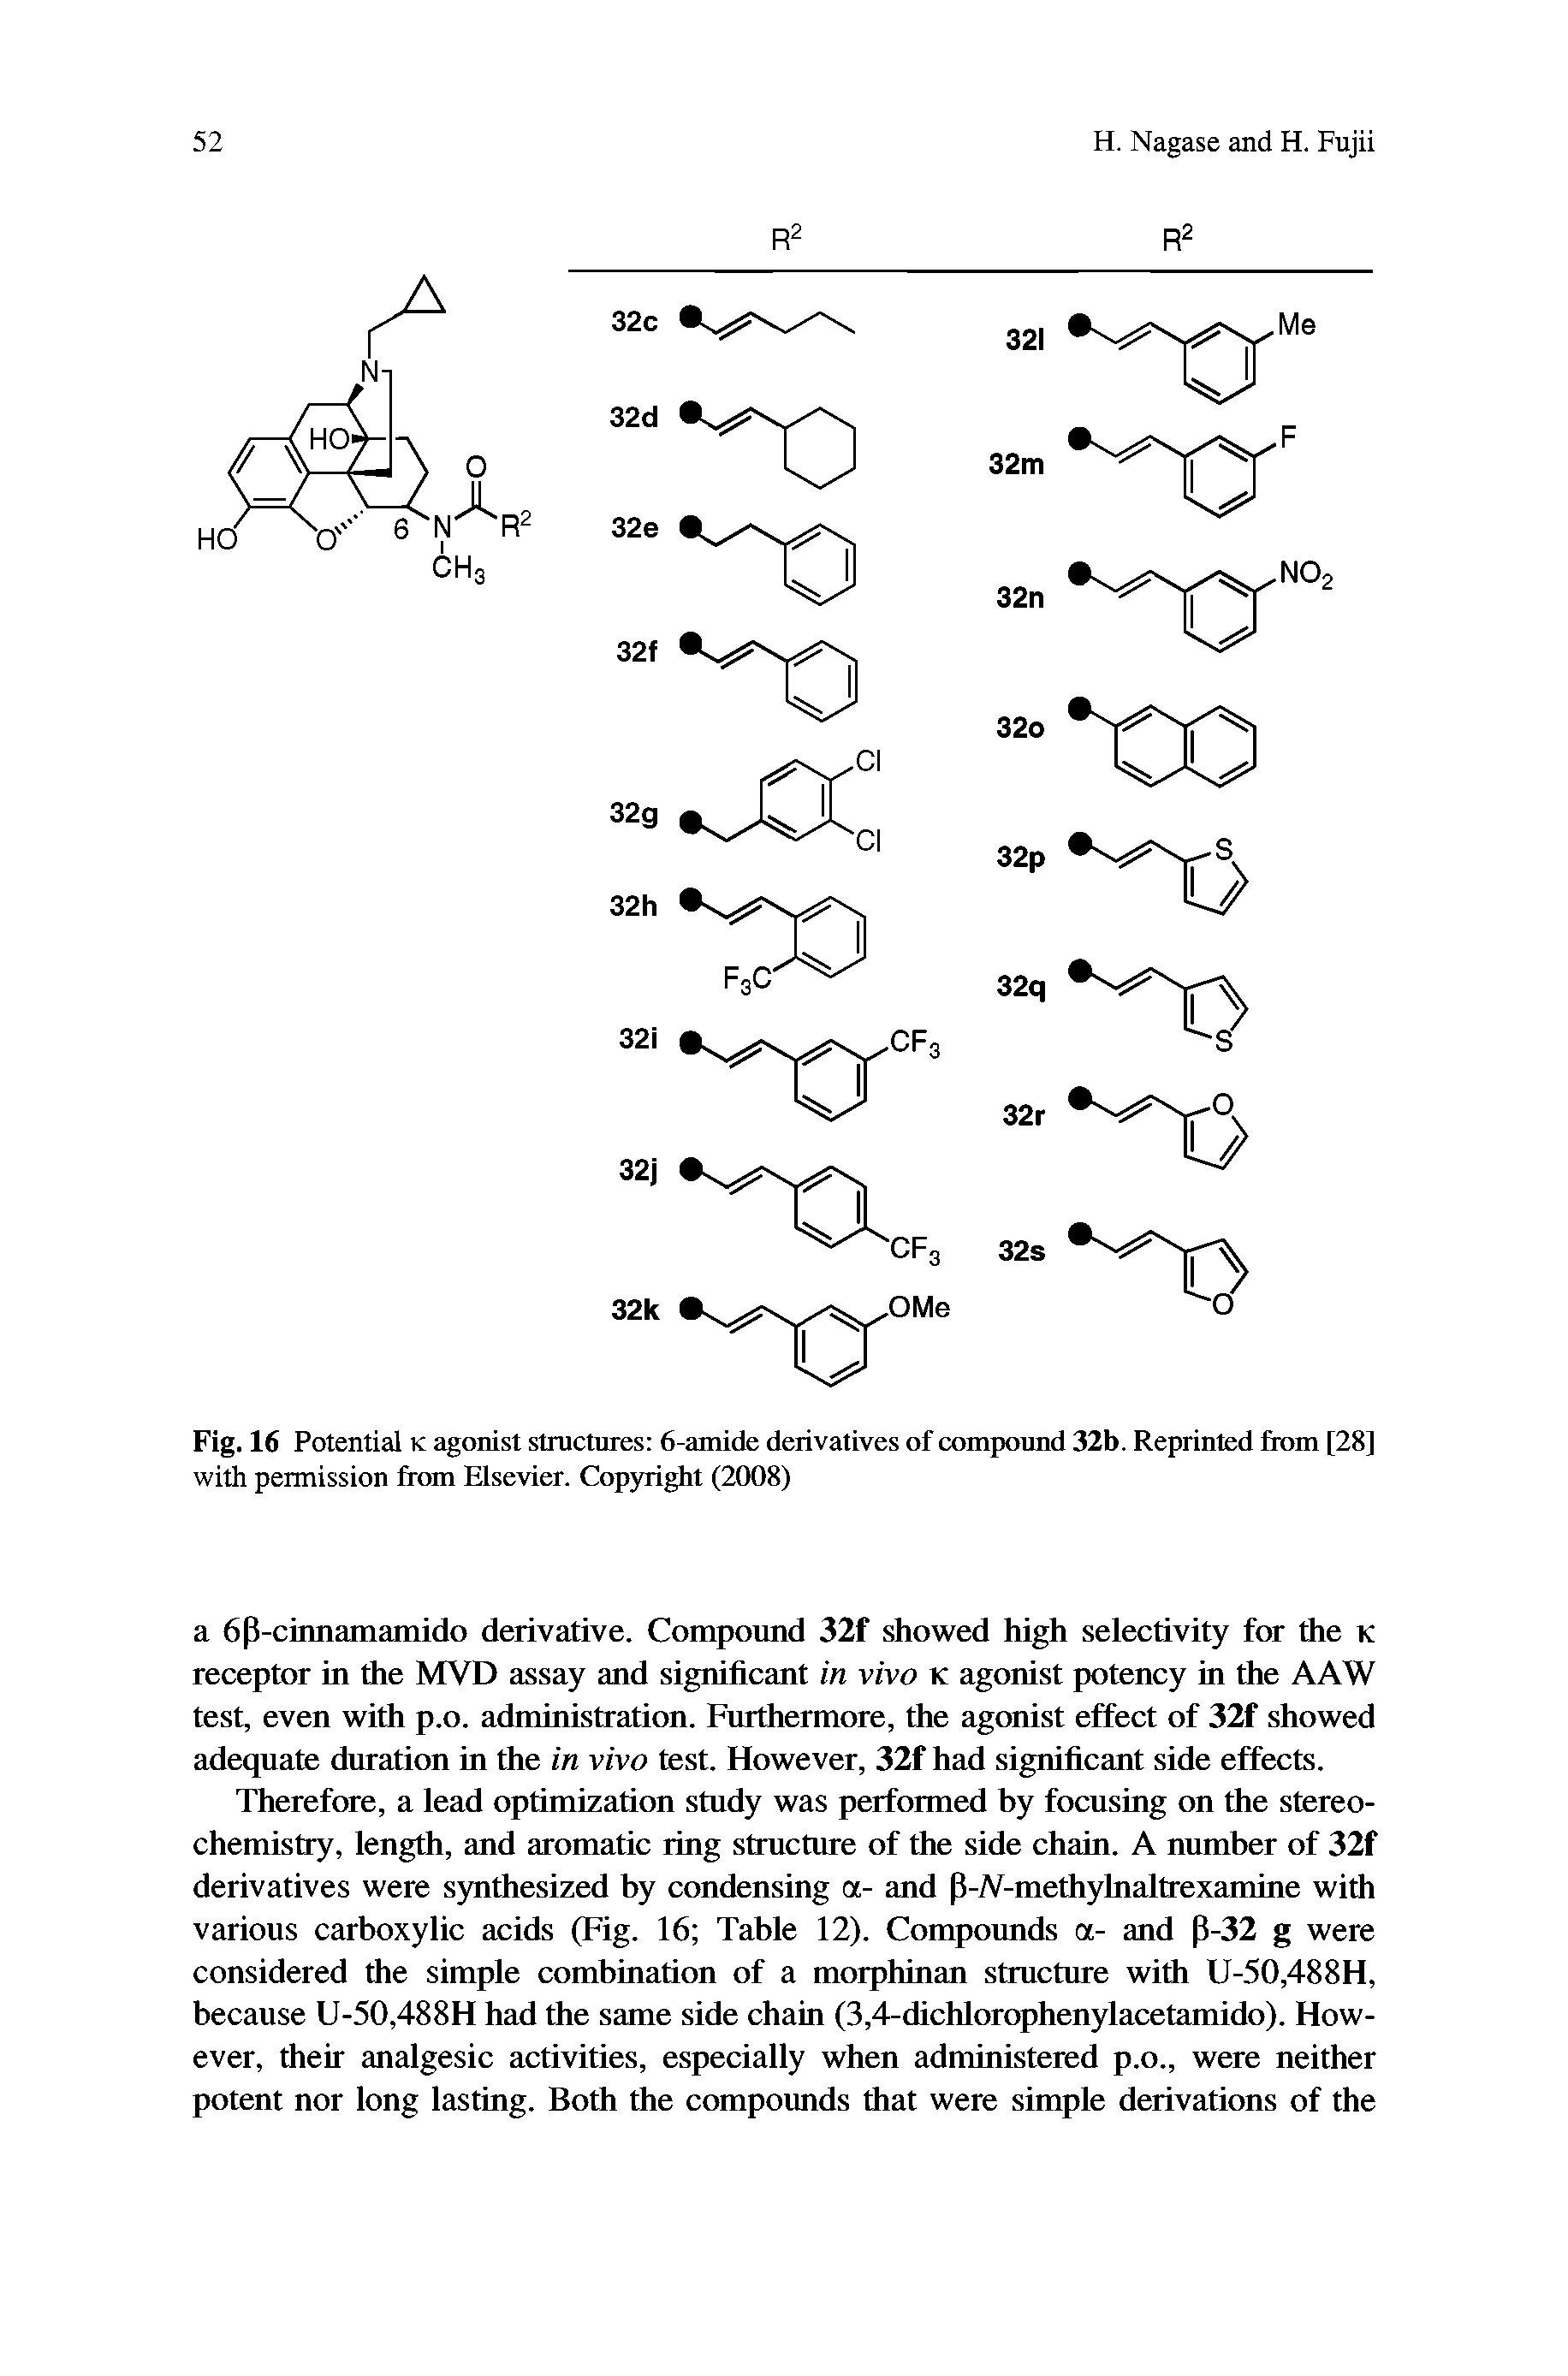 Fig. 16 Potential K agonist structures 6-amide derivatives of compound 32b. Reprinted from [28] with permission from Elsevier. Copyright (2008)...